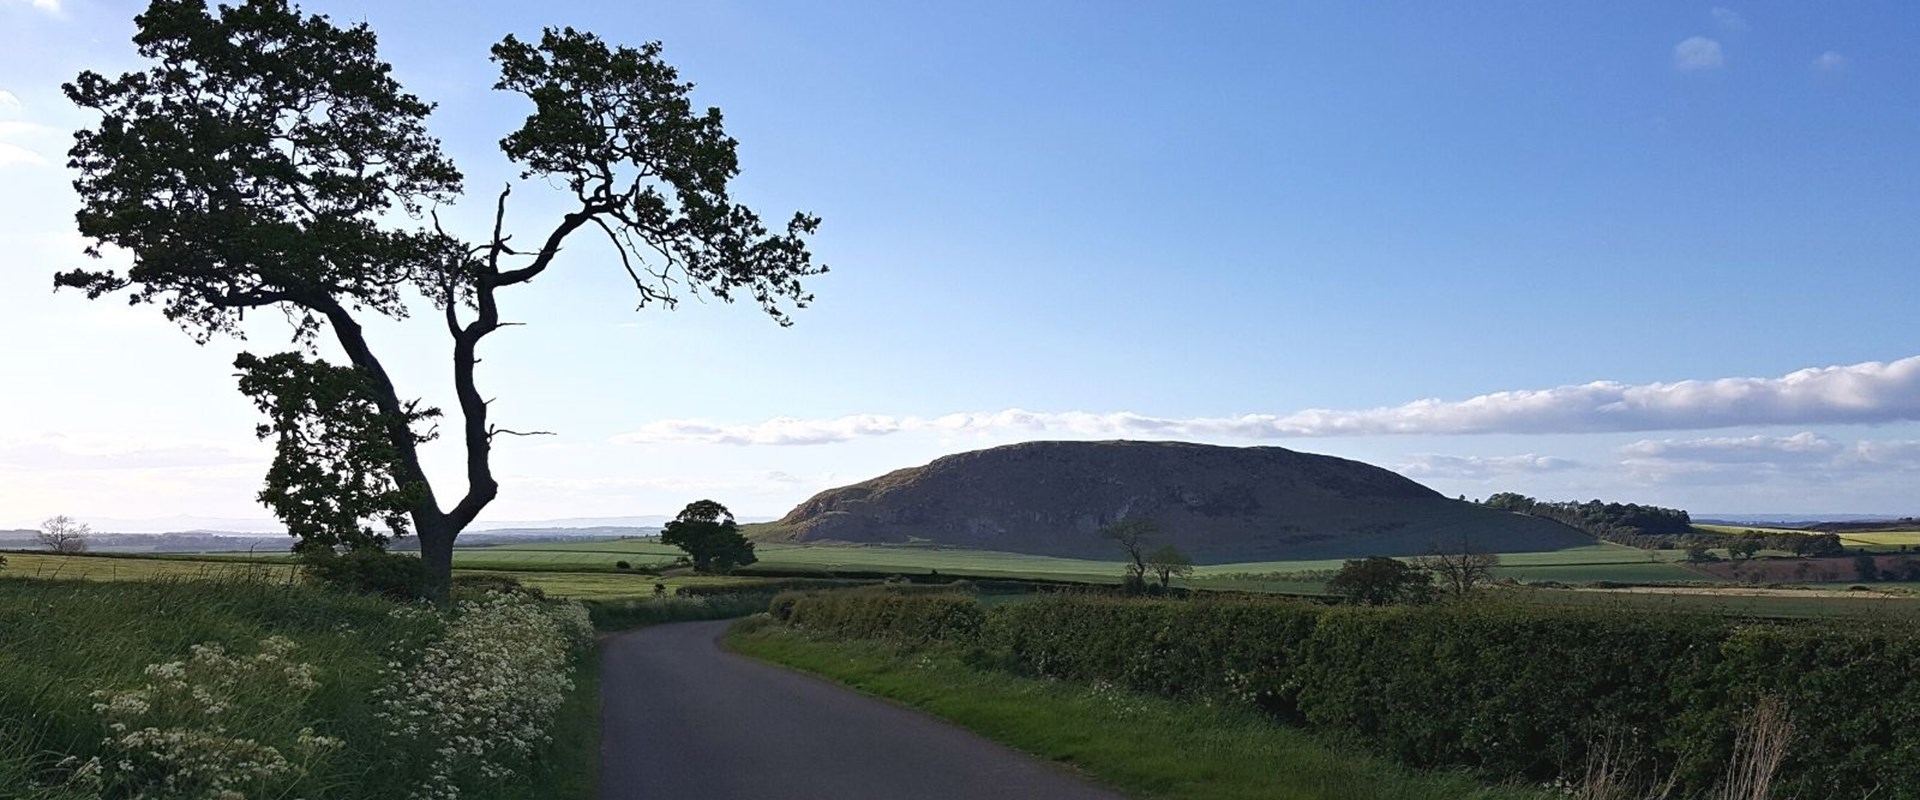 A large whaleback-shaped hill called Traprain law rises us from lush green and yellow fields under a blue sky.